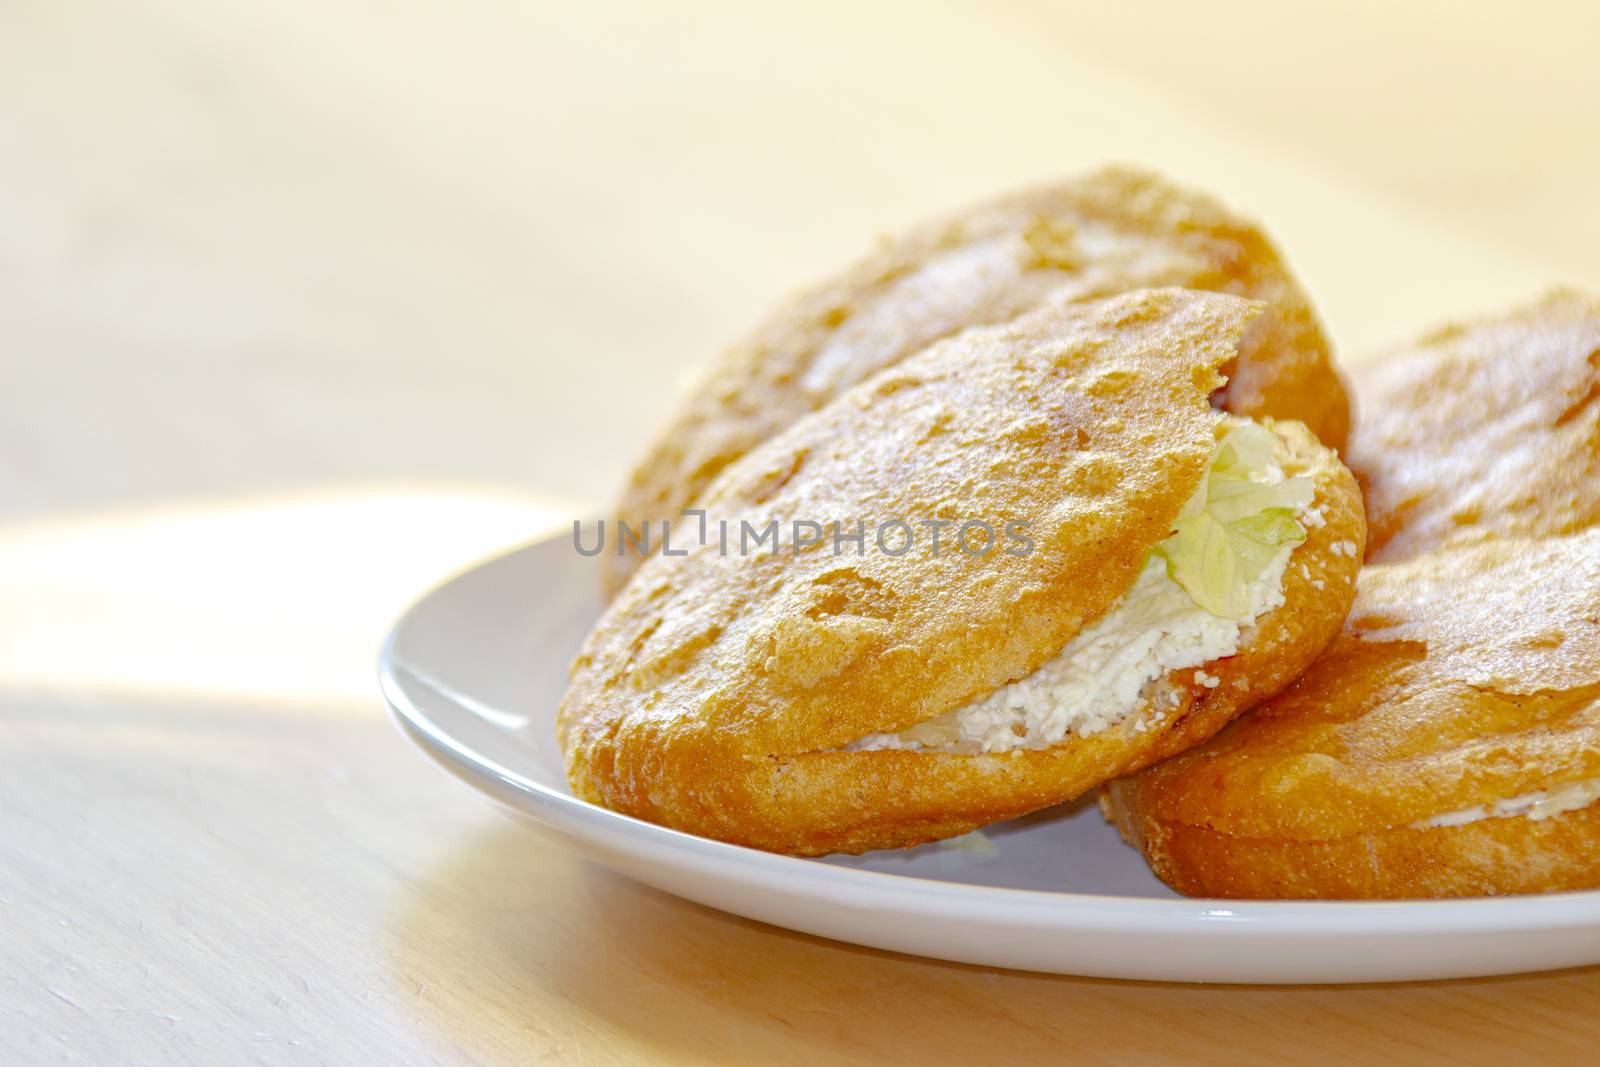 A close up of a Gordita "chubby" in Spanish is a Mexican cuisine is a pastry made with maize dough and stuffed with cheese, meat, or other fillings.